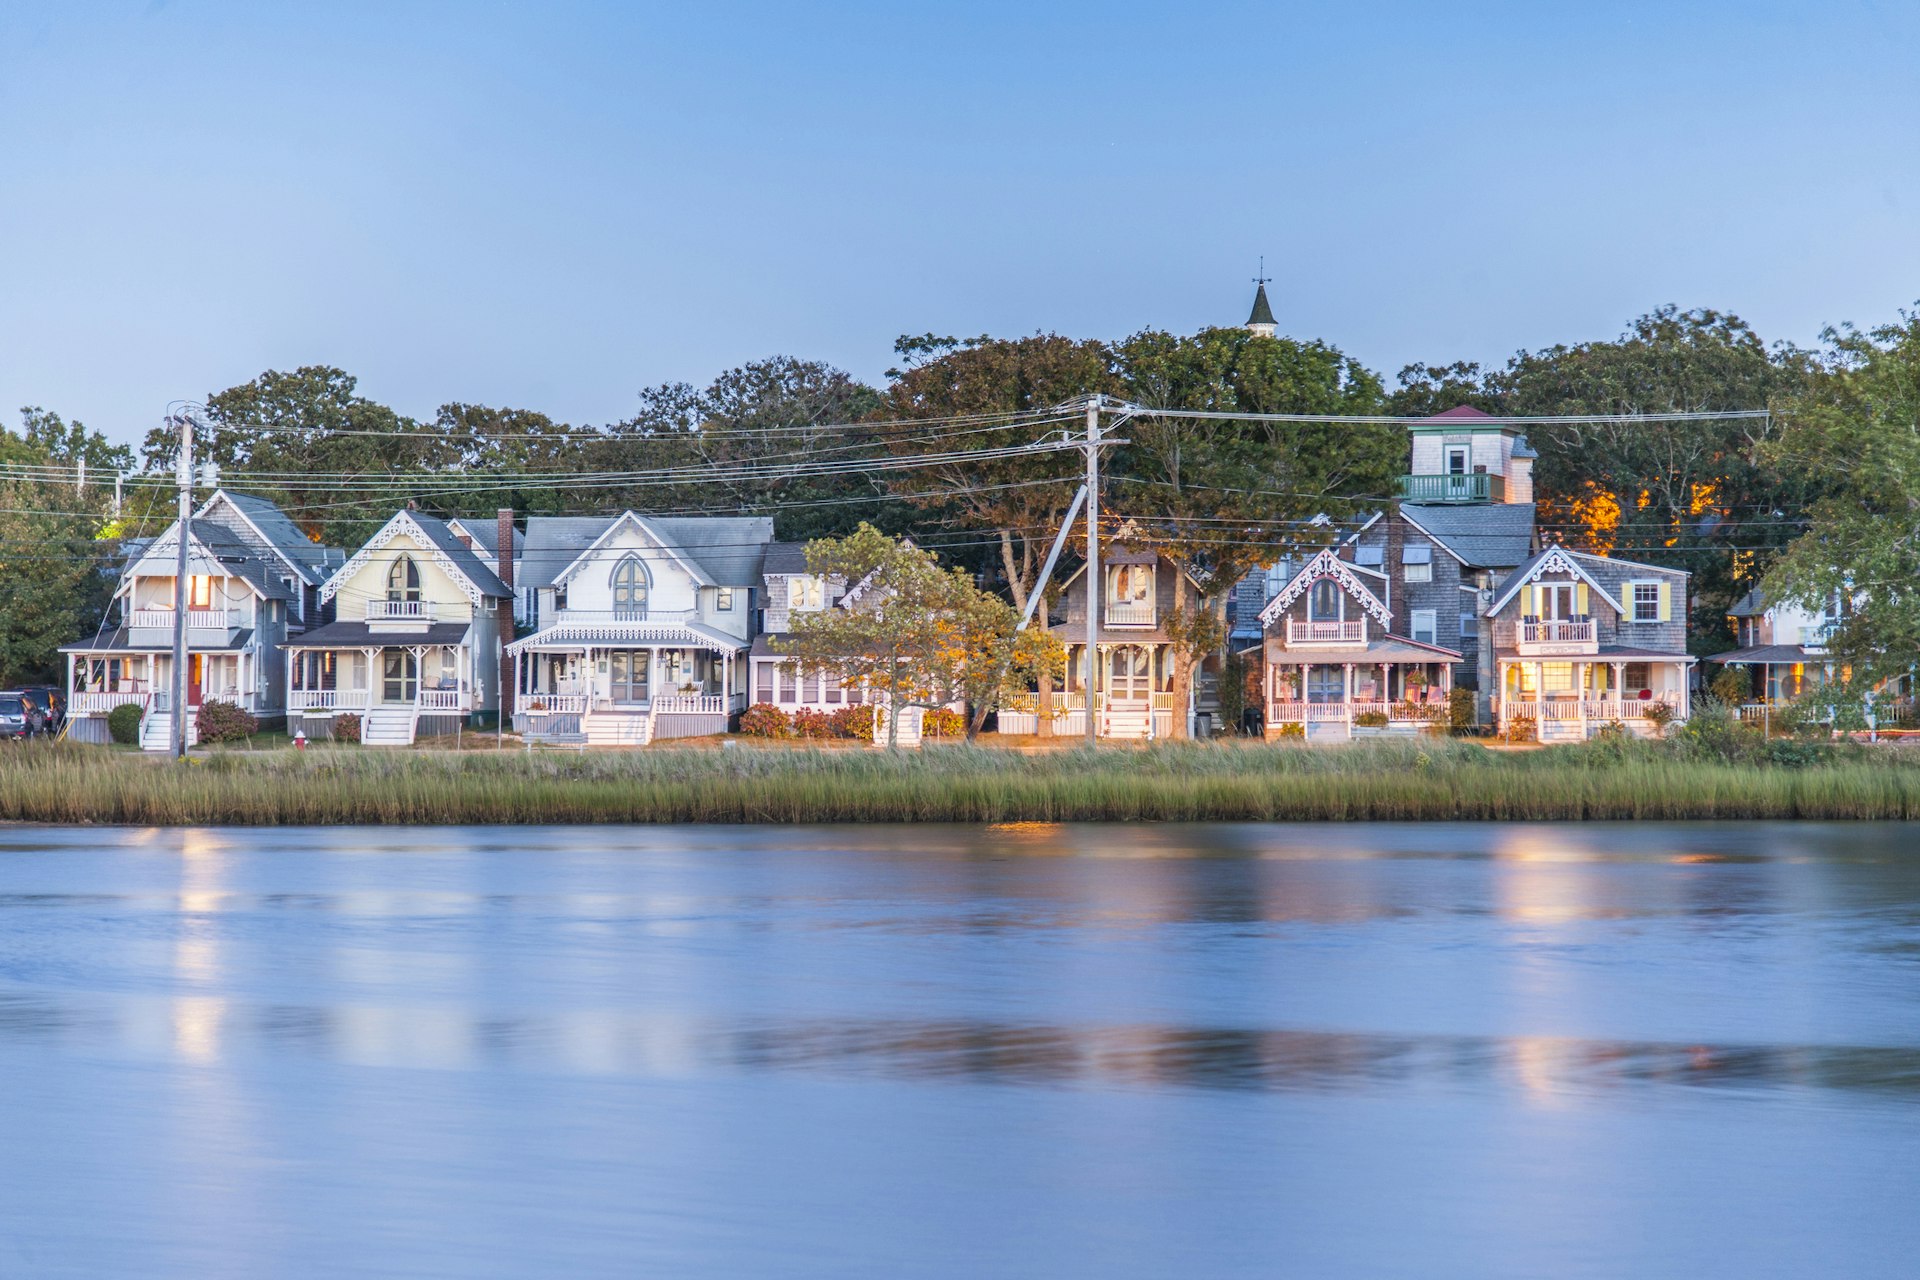 A row of large pastel-colored wooden houses faces the waterfront